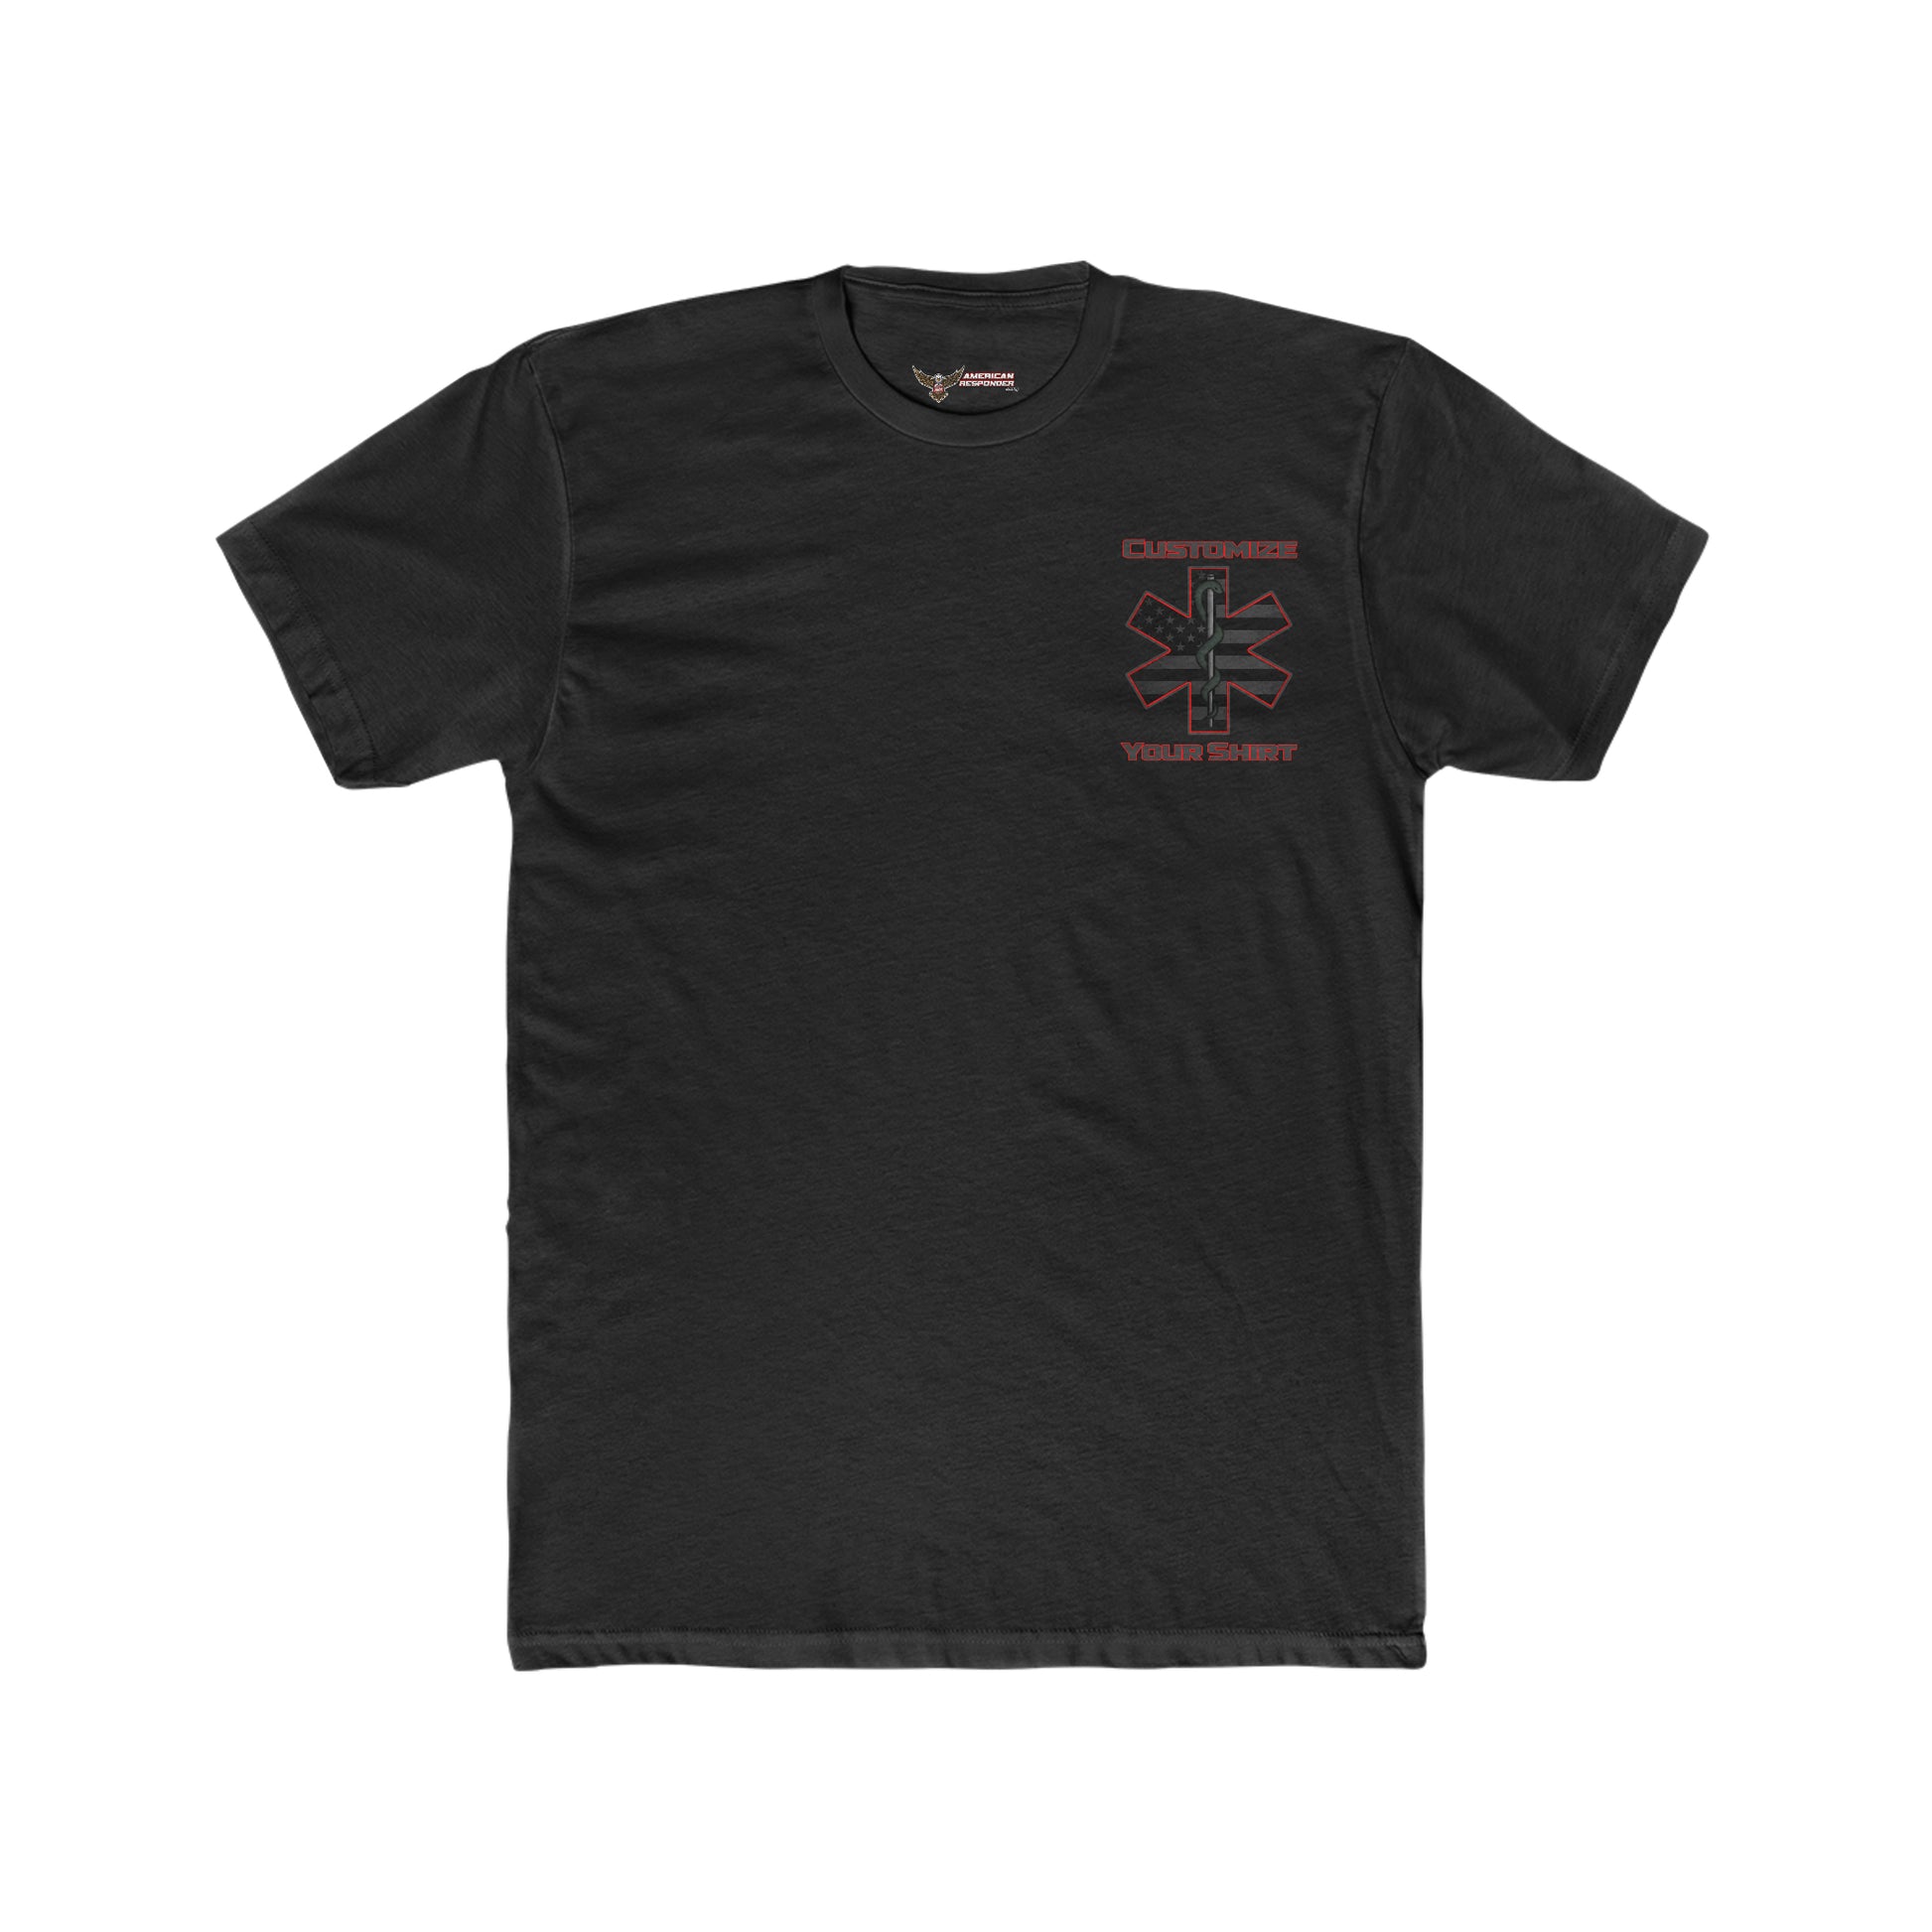 Personalized Subdued EMS Shirt - American Responder Designs